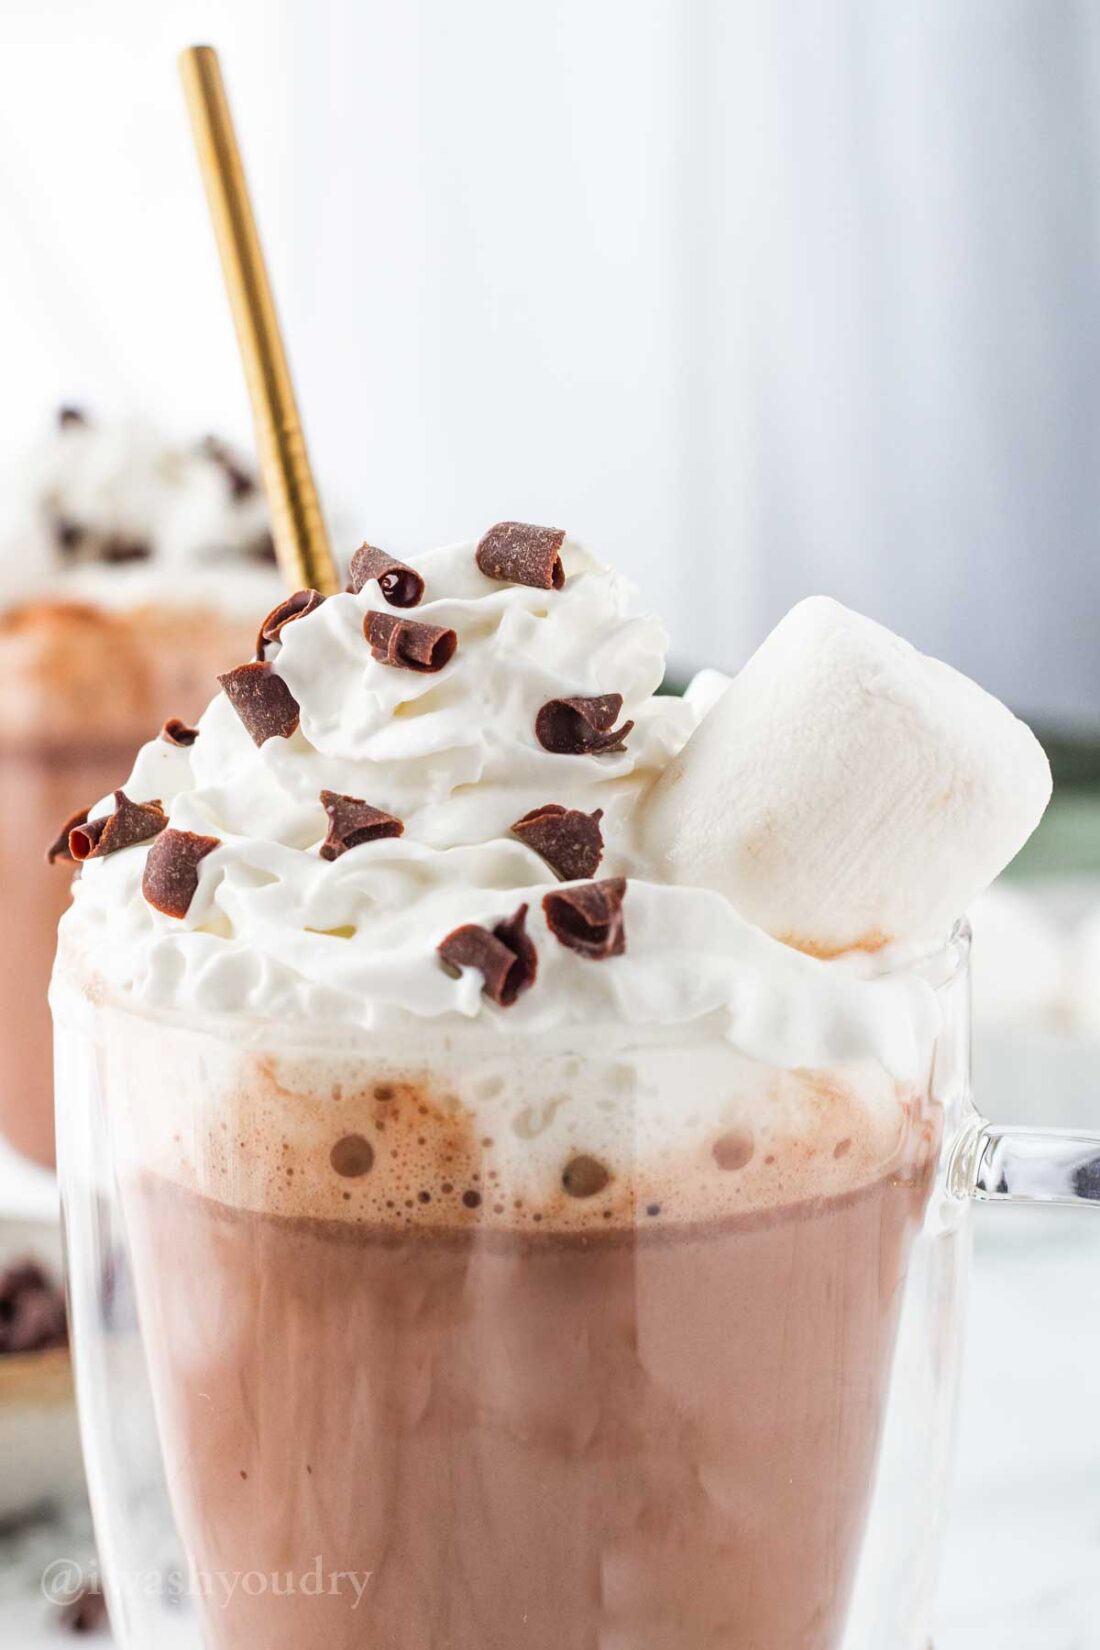 Glass mug of hot chocolate with whipped cream and marshmallow on top. 